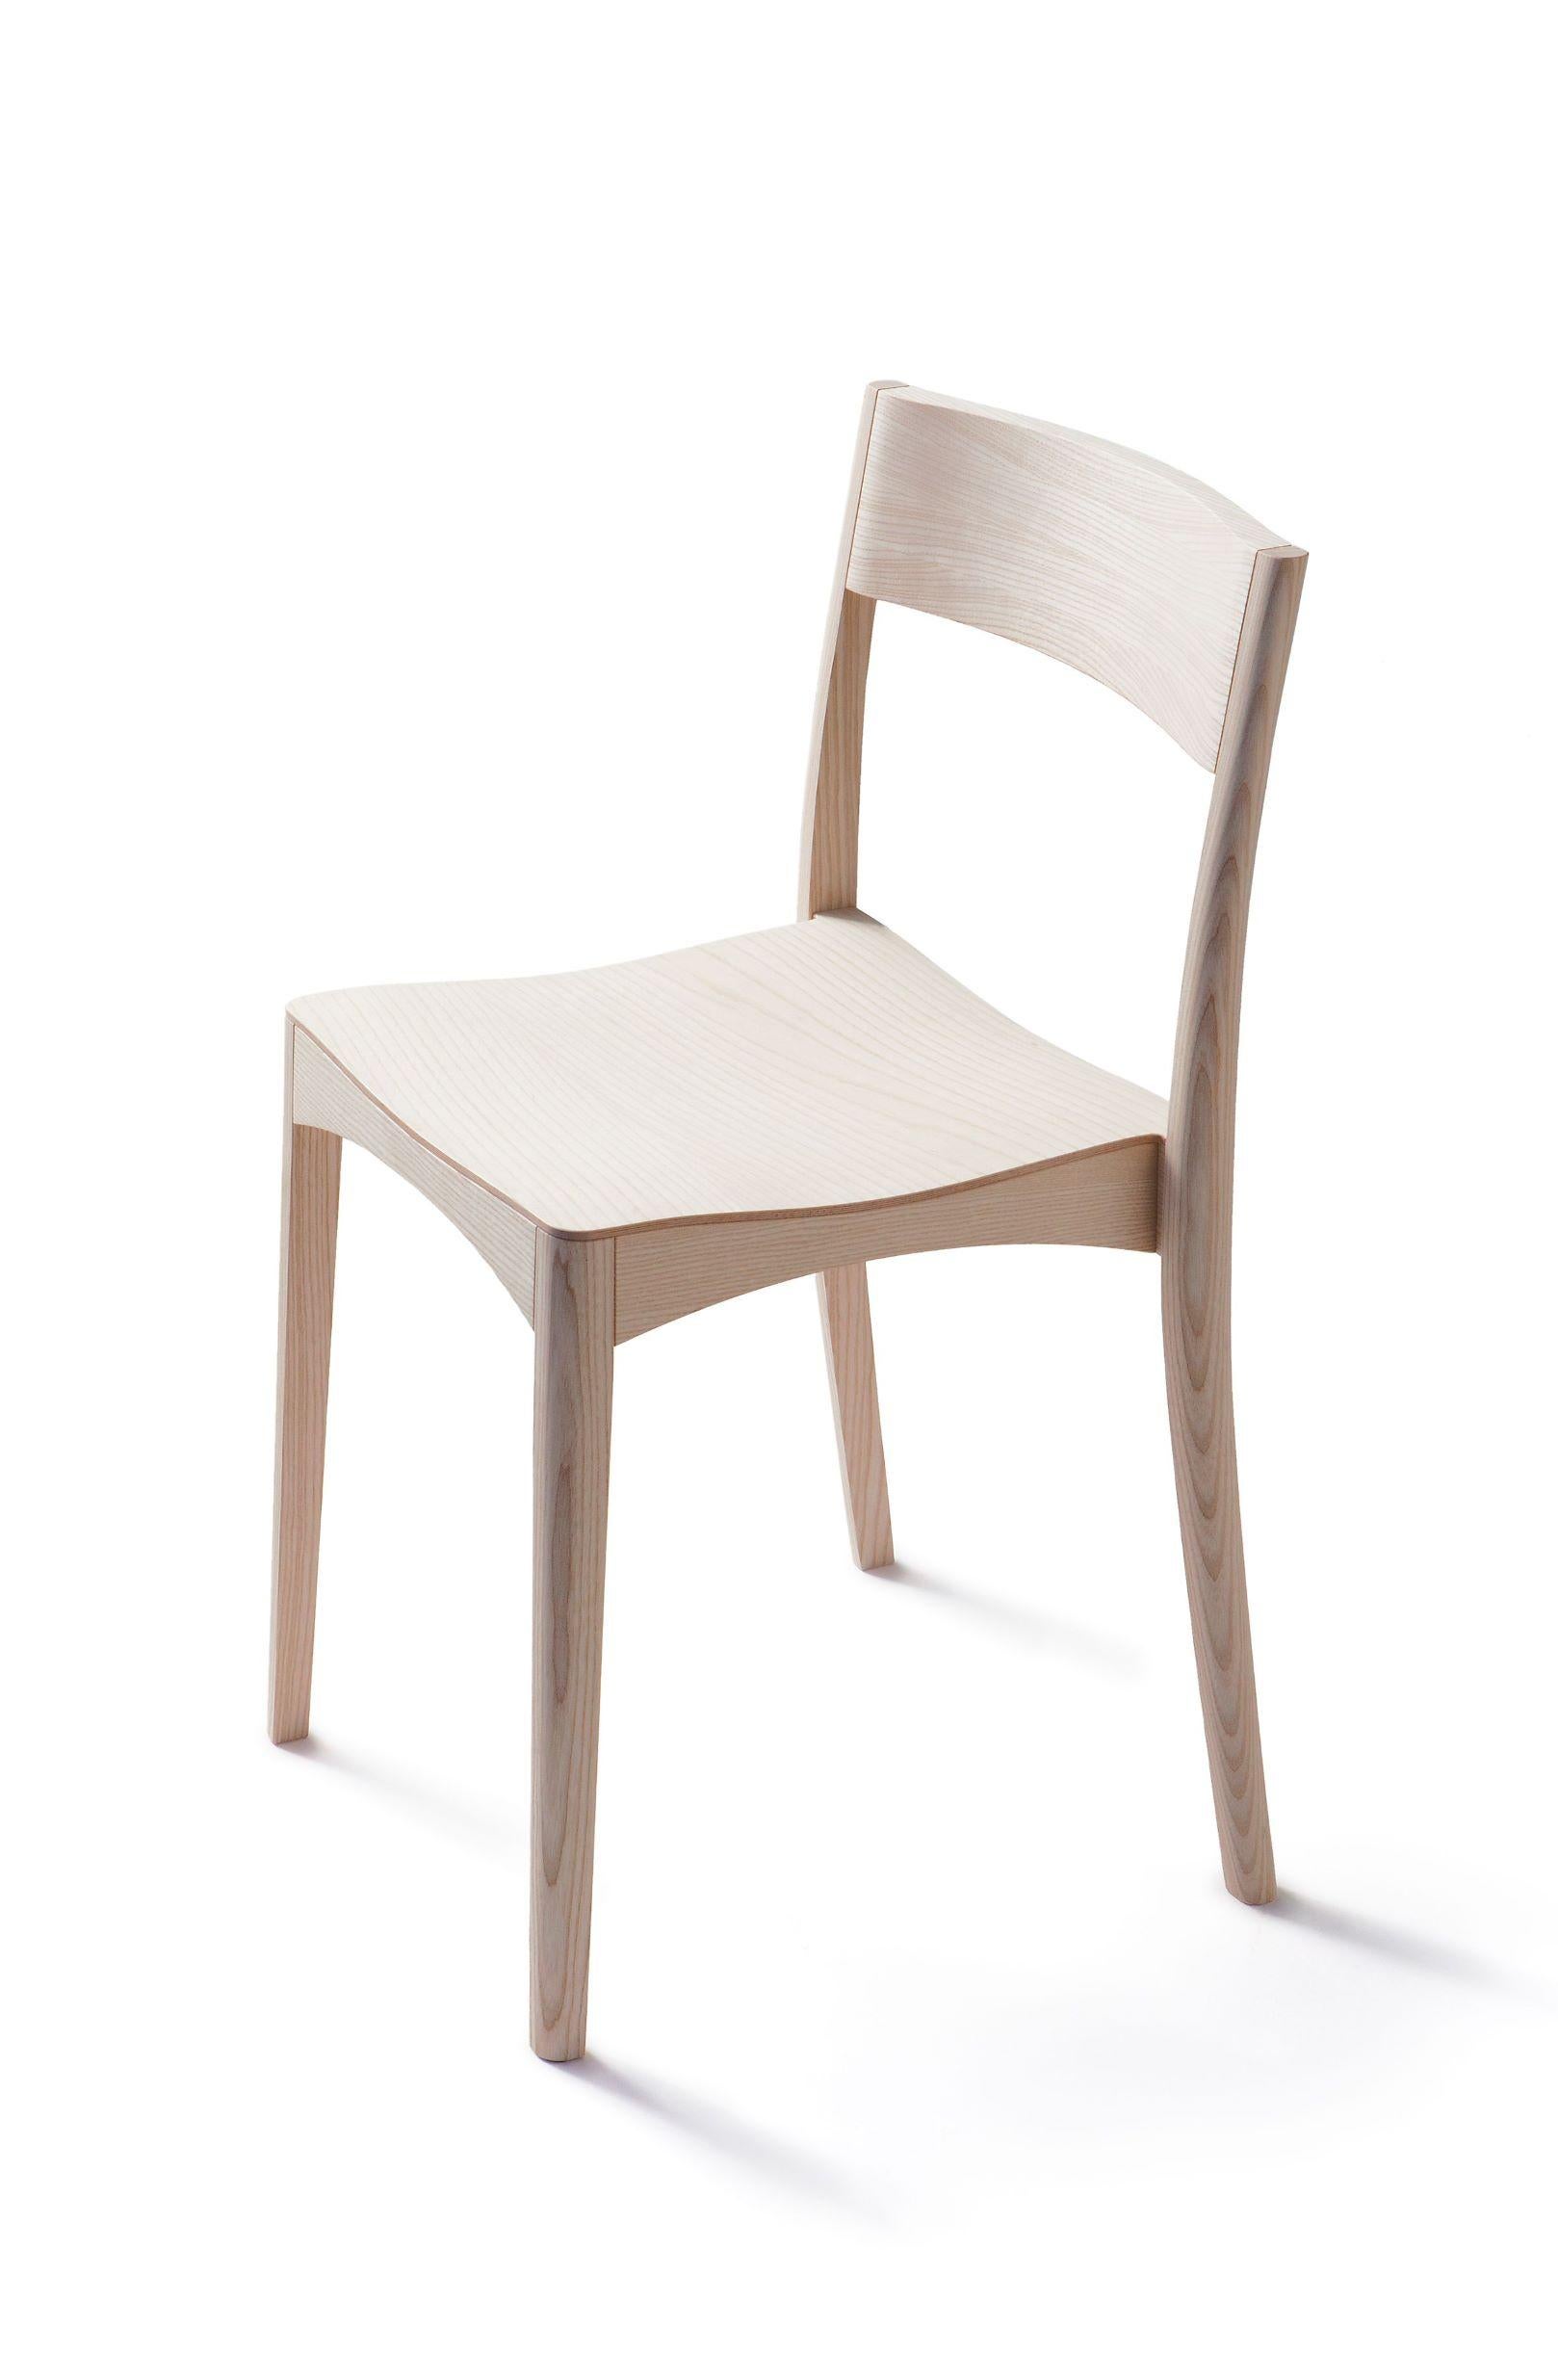 Woodwork October Light Chair in Ash by Samuli Naamanka For Sale